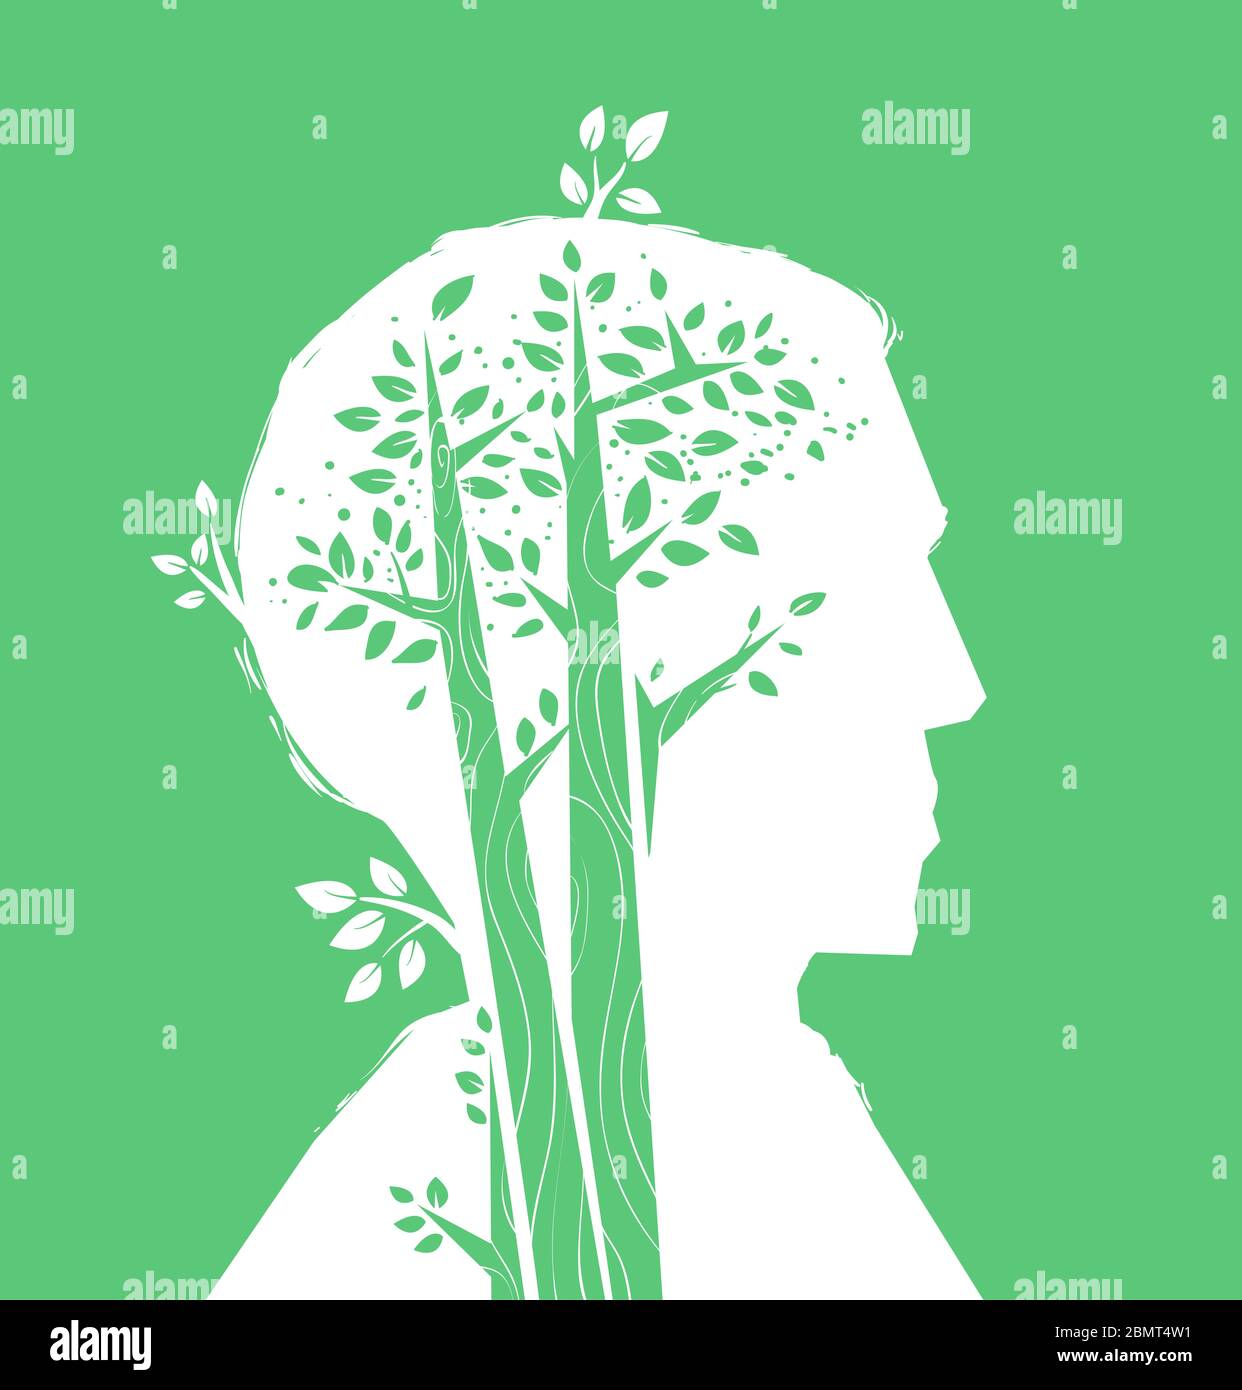 Illustration of a Head Profile with Tree Inside. Tree of Knowledge Concept Stock Photo